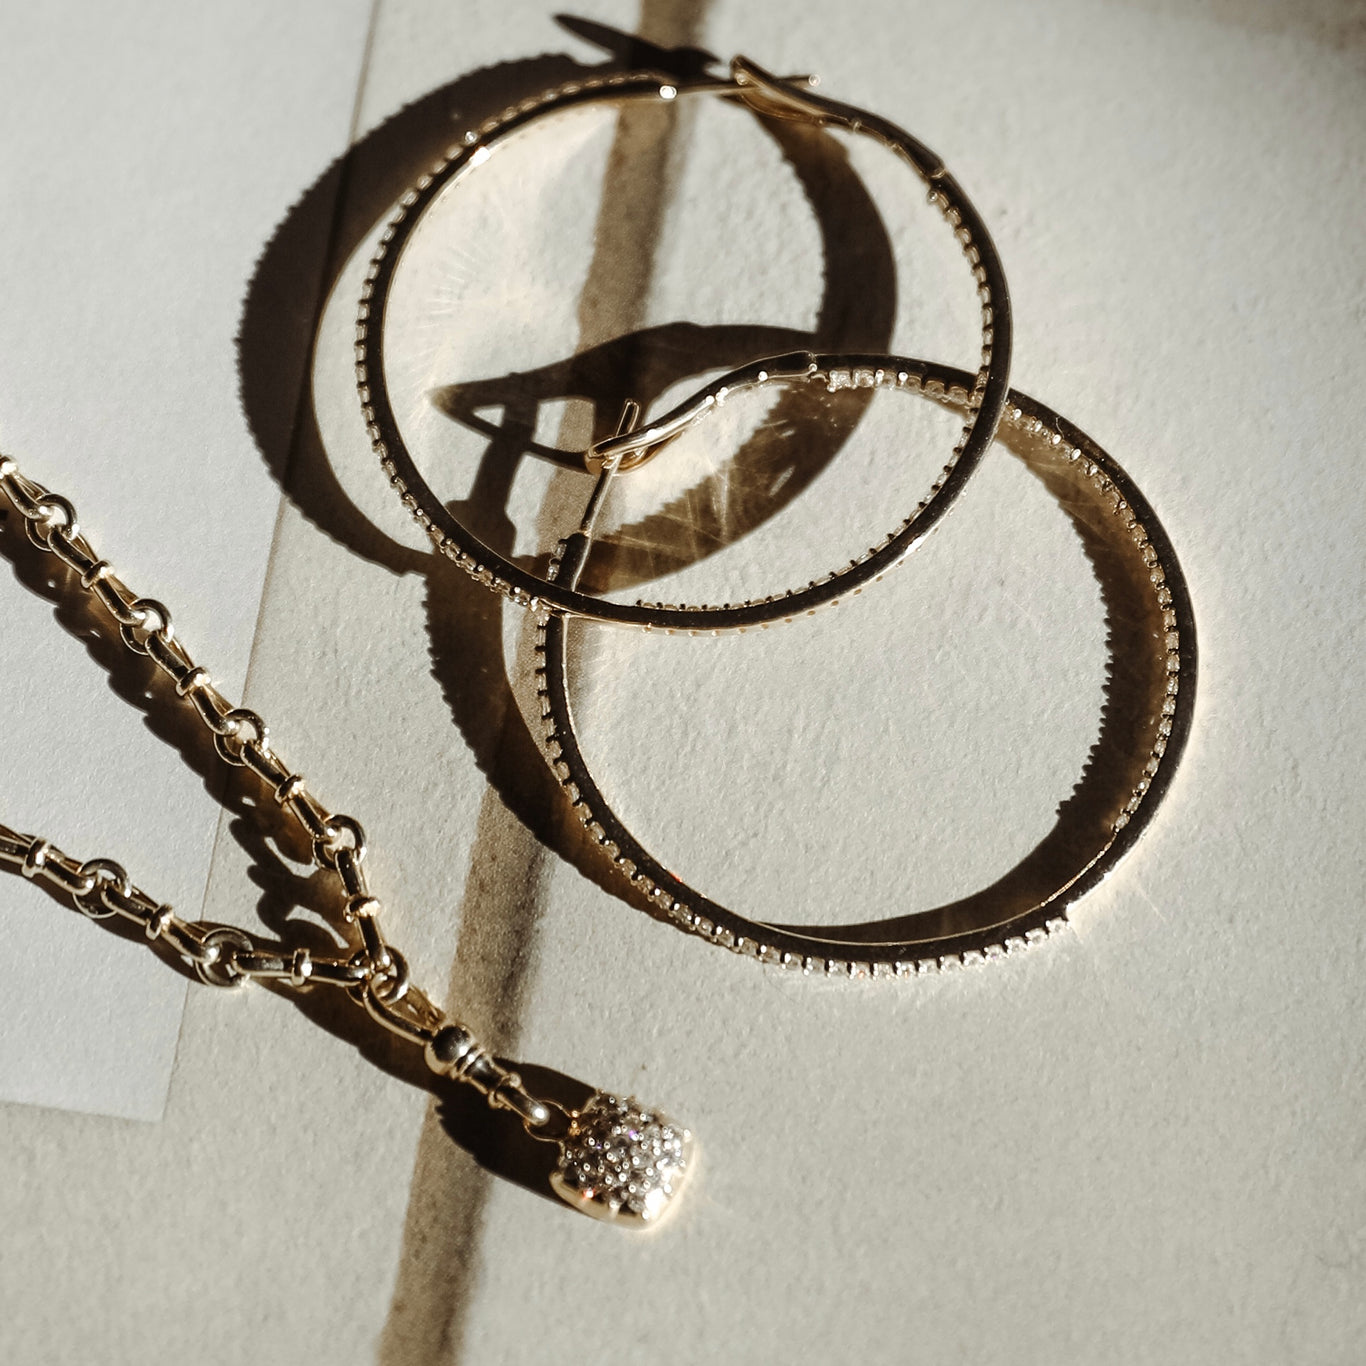 Trilogy Necklace shown with the Infinity Hoops